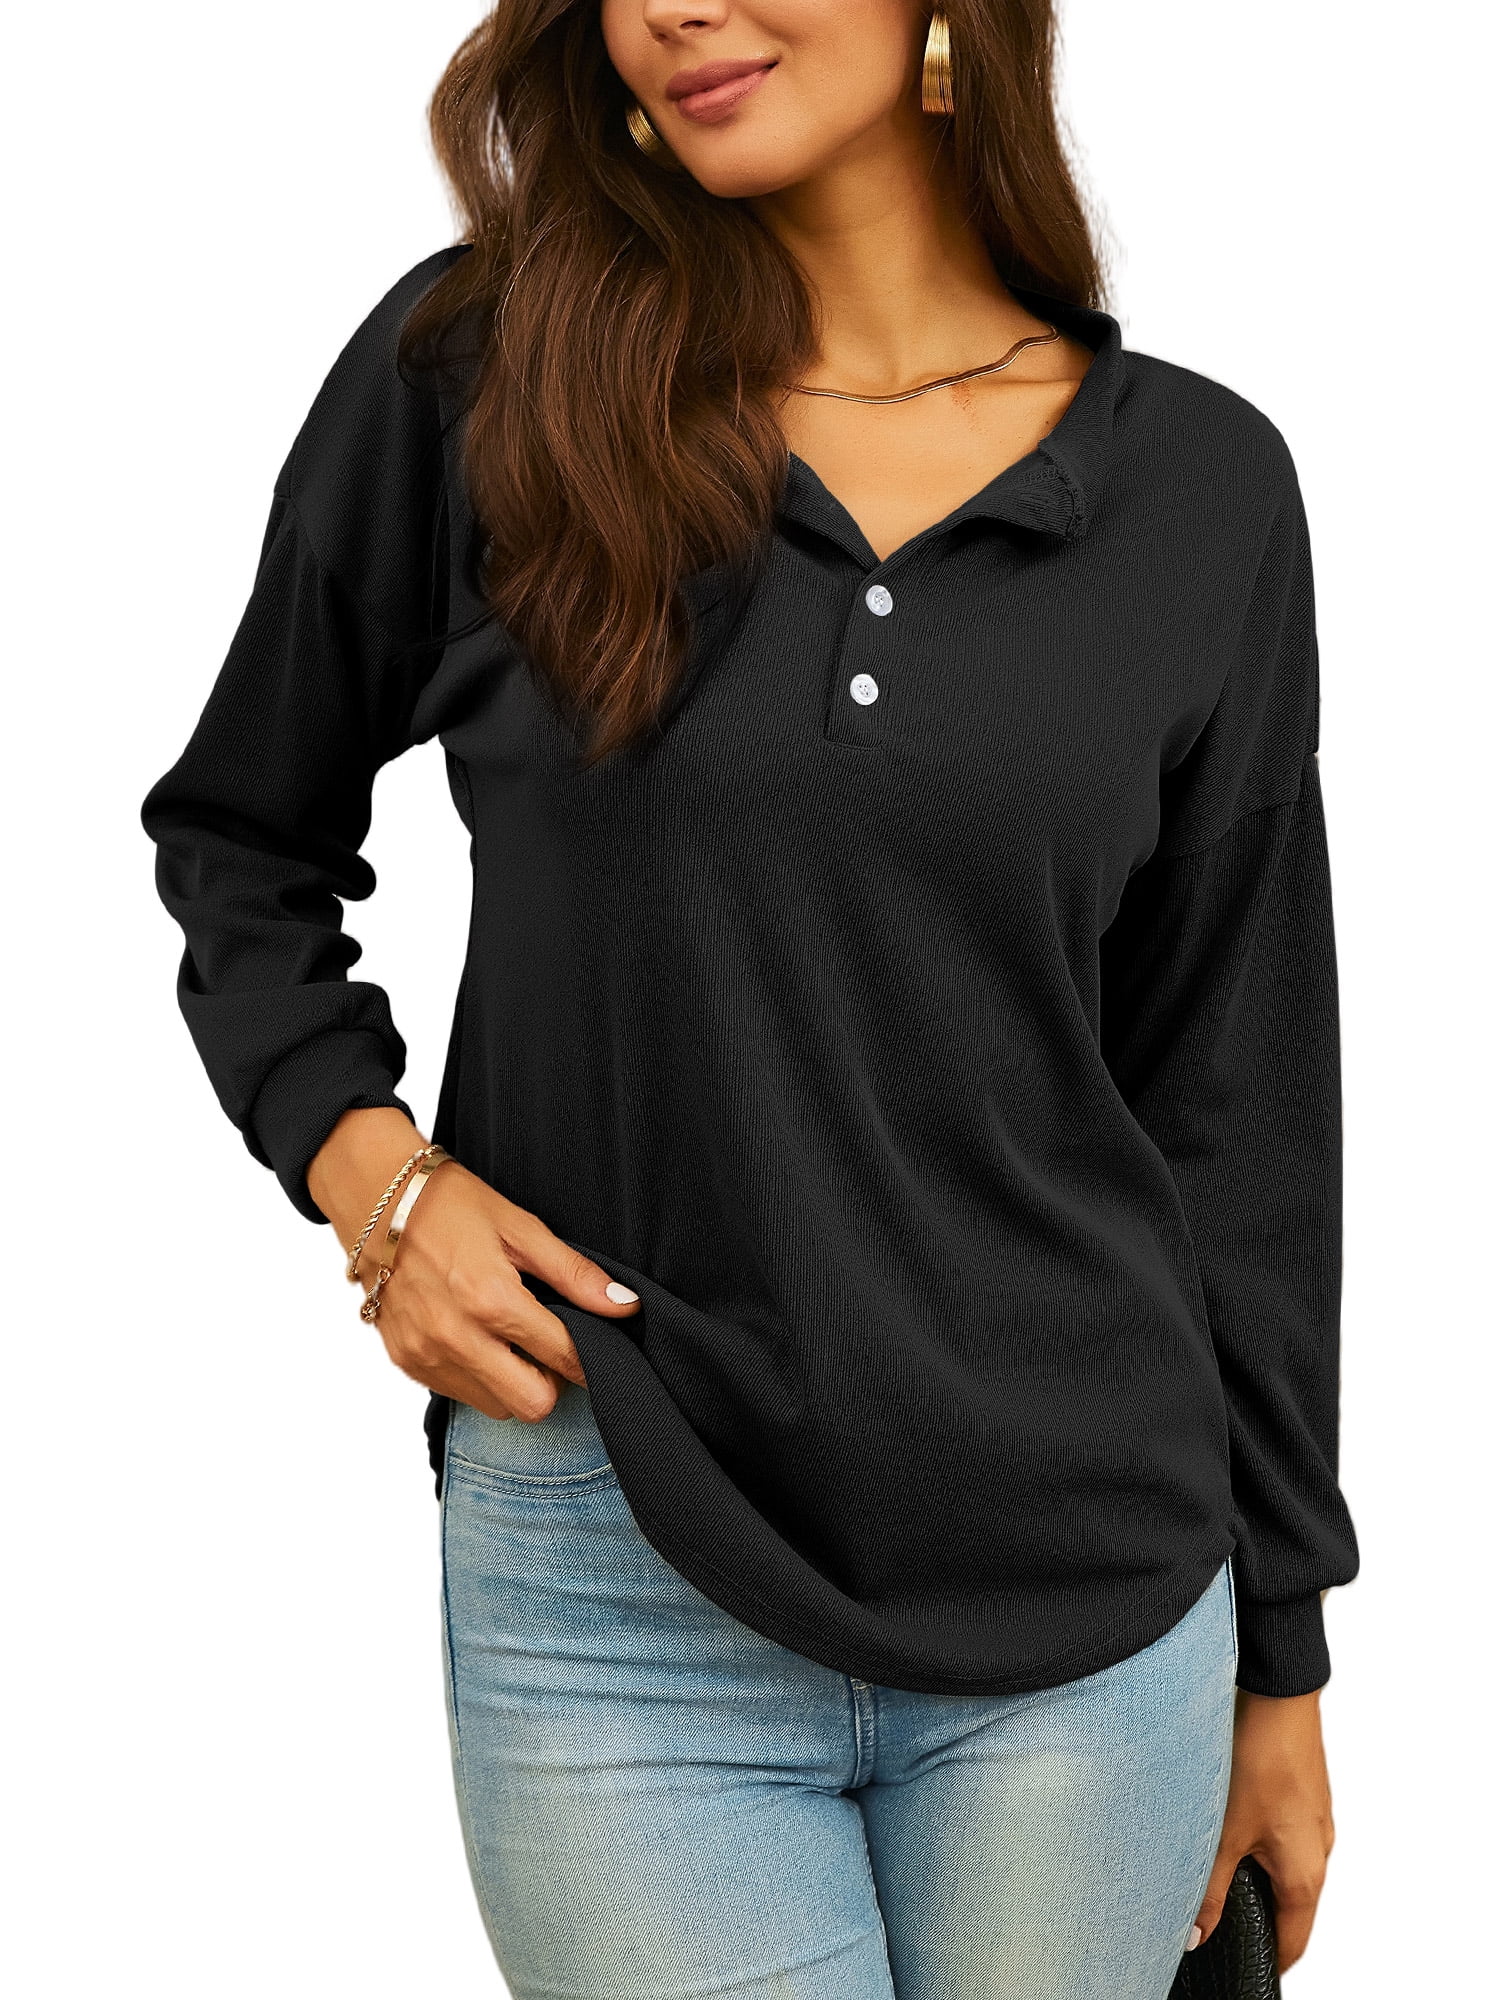 Casual Tshirt for Womens V Neck Buttons Down Shirt Loose Tunic Tops ...